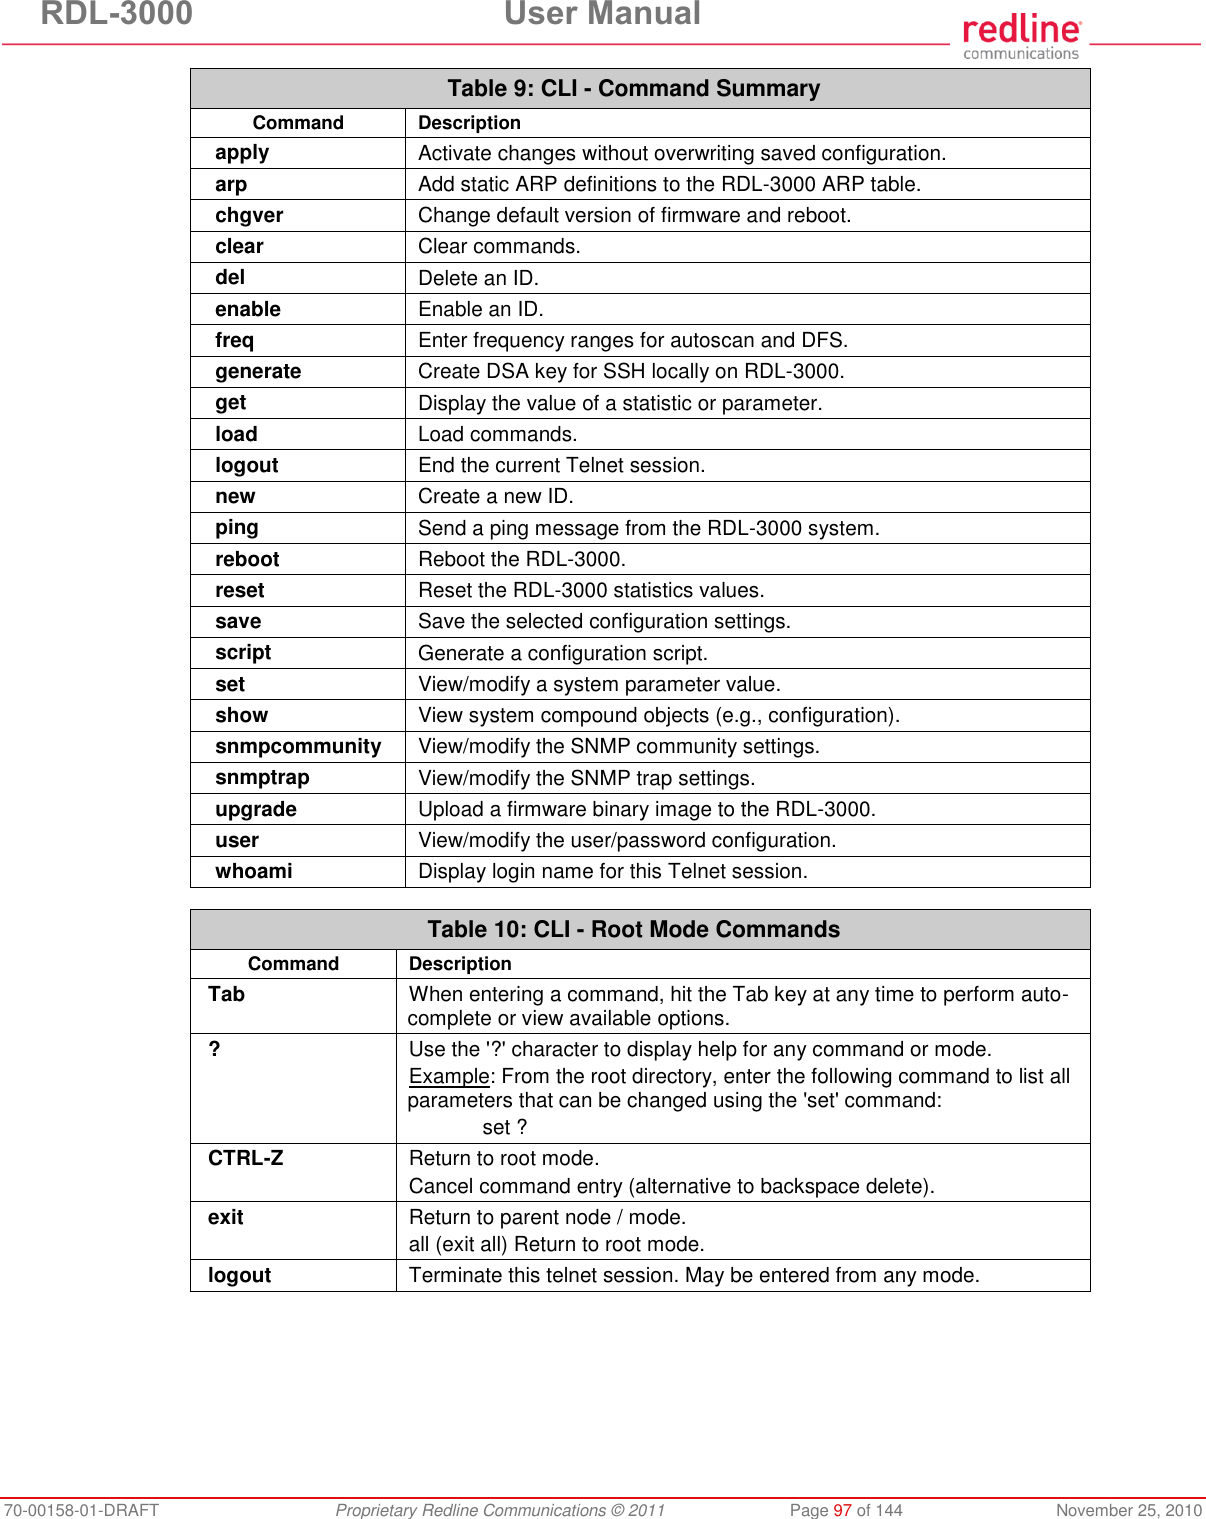 RDL-3000  User Manual 70-00158-01-DRAFT  Proprietary Redline Communications © 2011  Page 97 of 144  November 25, 2010 Table 9: CLI - Command Summary Command Description apply Activate changes without overwriting saved configuration. arp Add static ARP definitions to the RDL-3000 ARP table. chgver Change default version of firmware and reboot. clear Clear commands. del Delete an ID. enable Enable an ID. freq Enter frequency ranges for autoscan and DFS. generate Create DSA key for SSH locally on RDL-3000. get Display the value of a statistic or parameter.  load Load commands. logout End the current Telnet session. new Create a new ID. ping Send a ping message from the RDL-3000 system. reboot Reboot the RDL-3000. reset Reset the RDL-3000 statistics values. save Save the selected configuration settings. script Generate a configuration script. set View/modify a system parameter value. show View system compound objects (e.g., configuration). snmpcommunity View/modify the SNMP community settings. snmptrap View/modify the SNMP trap settings. upgrade Upload a firmware binary image to the RDL-3000. user View/modify the user/password configuration. whoami Display login name for this Telnet session.   Table 10: CLI - Root Mode Commands Command Description Tab When entering a command, hit the Tab key at any time to perform auto-complete or view available options. ? Use the &apos;?&apos; character to display help for any command or mode. Example: From the root directory, enter the following command to list all parameters that can be changed using the &apos;set&apos; command:   set ? CTRL-Z Return to root mode. Cancel command entry (alternative to backspace delete). exit  Return to parent node / mode. all (exit all) Return to root mode. logout Terminate this telnet session. May be entered from any mode.   